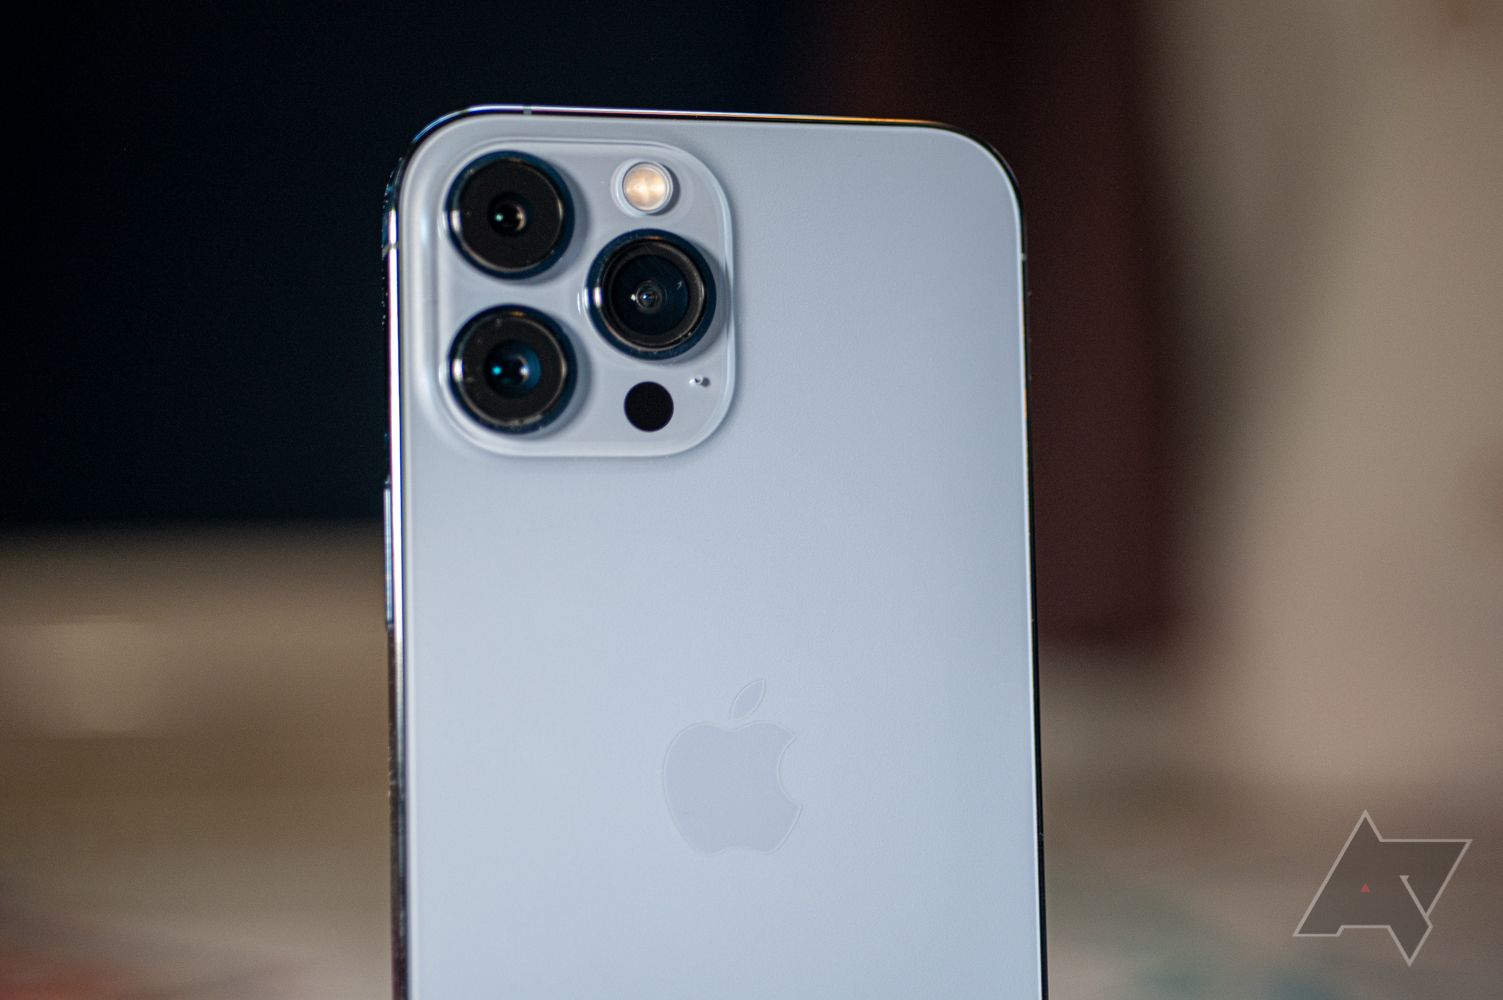 The camera on an iPhone 13 Pro